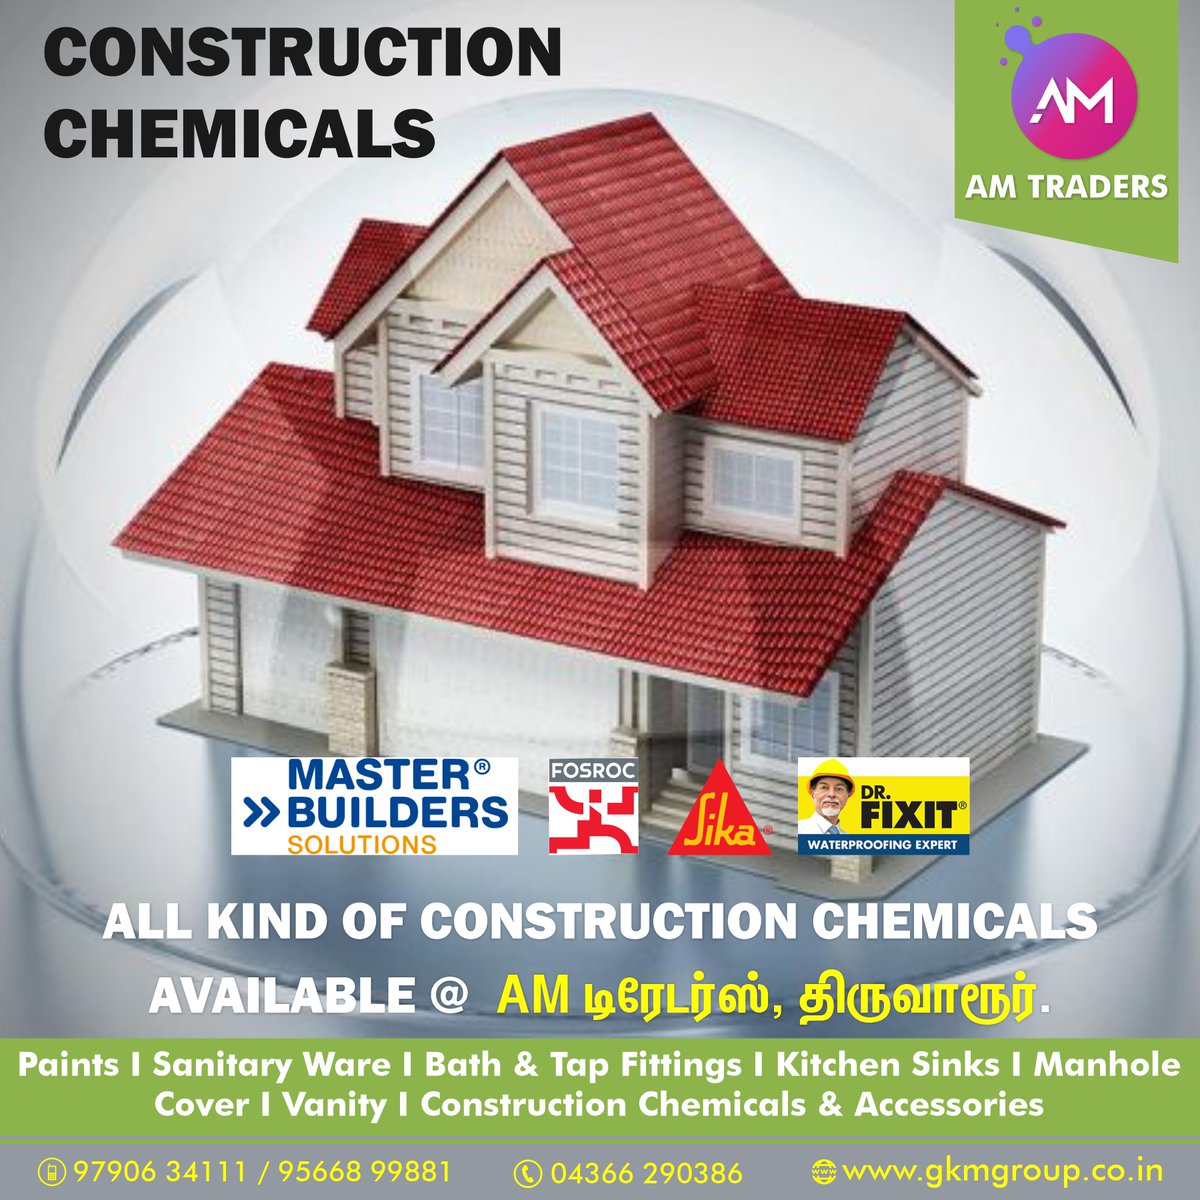 All kind of Building Construction Chemicals Available at AM Traders Thiruvarur.

#constructionchemicals #Pidilite #DrFixit #fosroc #sika #masterbuilderssolutions #basf #scp #waterproofing #WaterproofingChemicals #amtraders #Thiruvarur